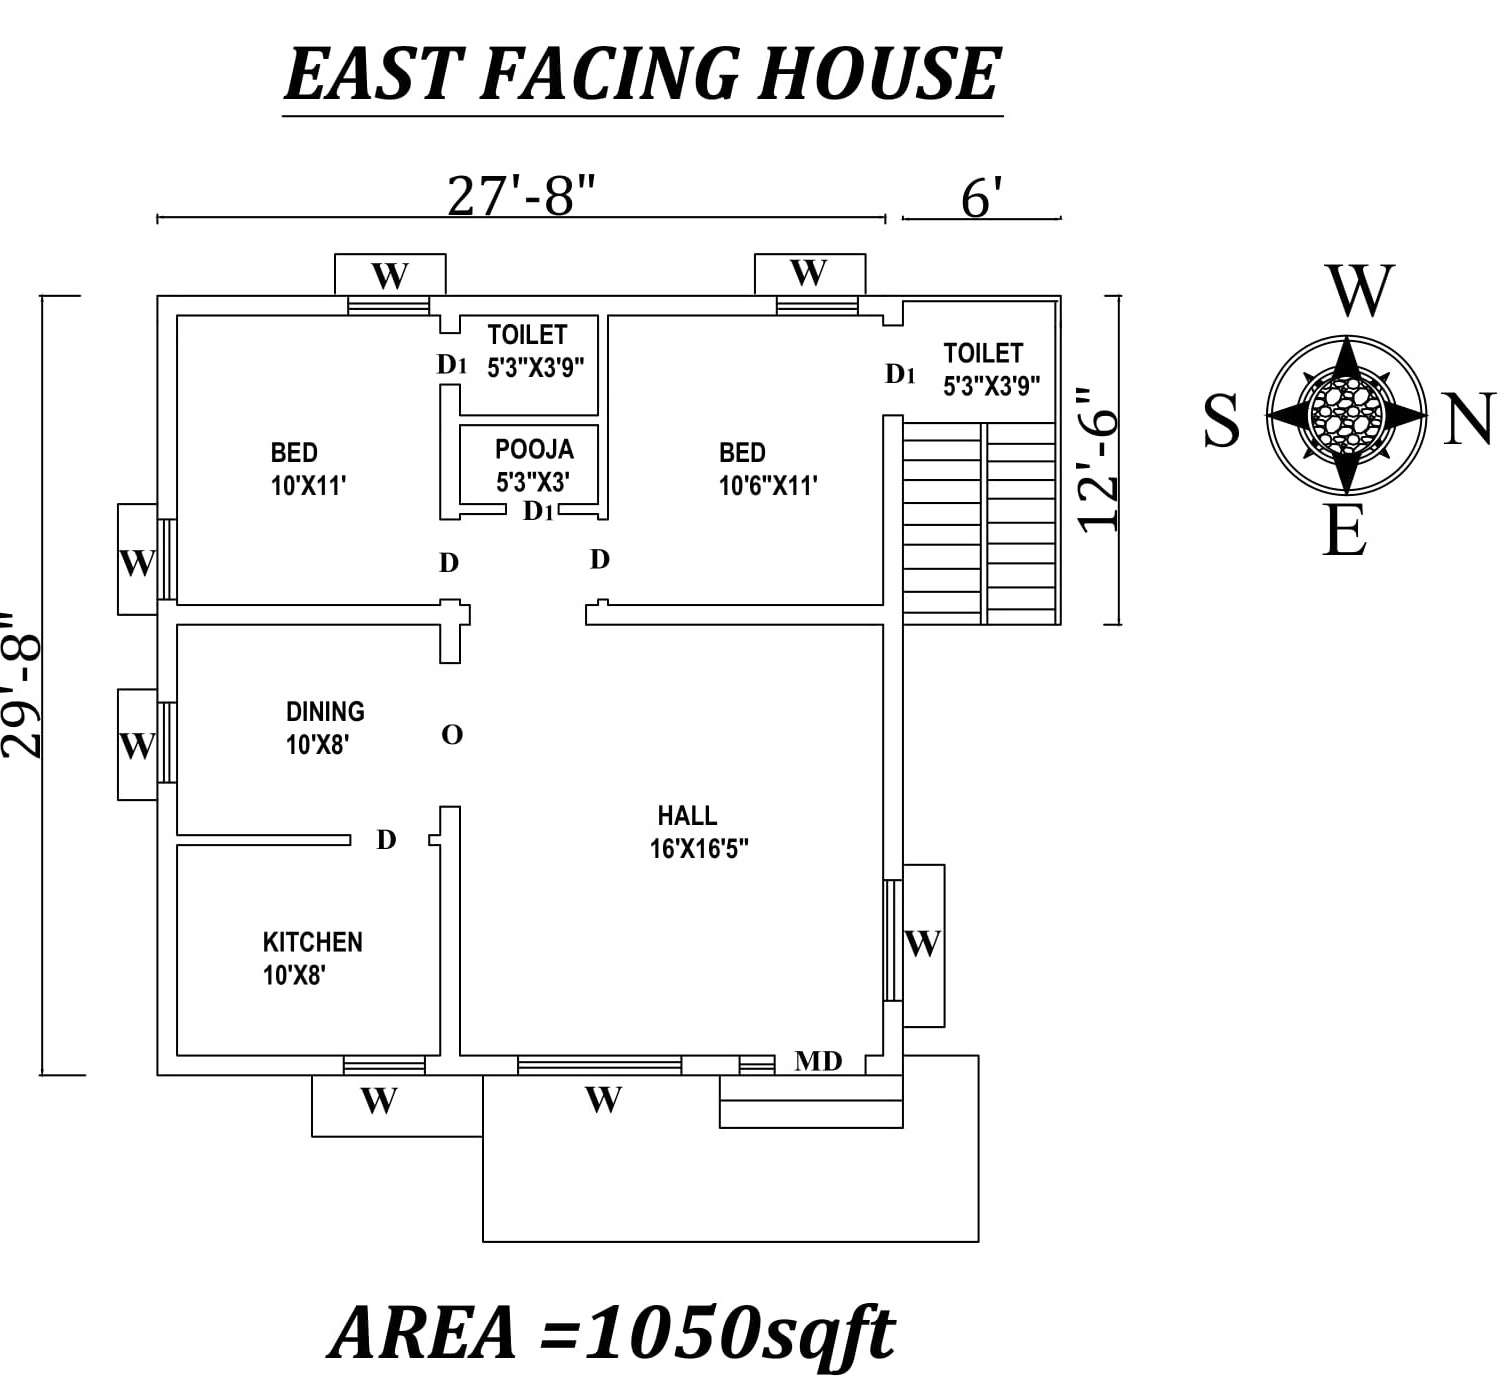 27'8" x29'8" The Perfect 2bhk East facing House Plan As